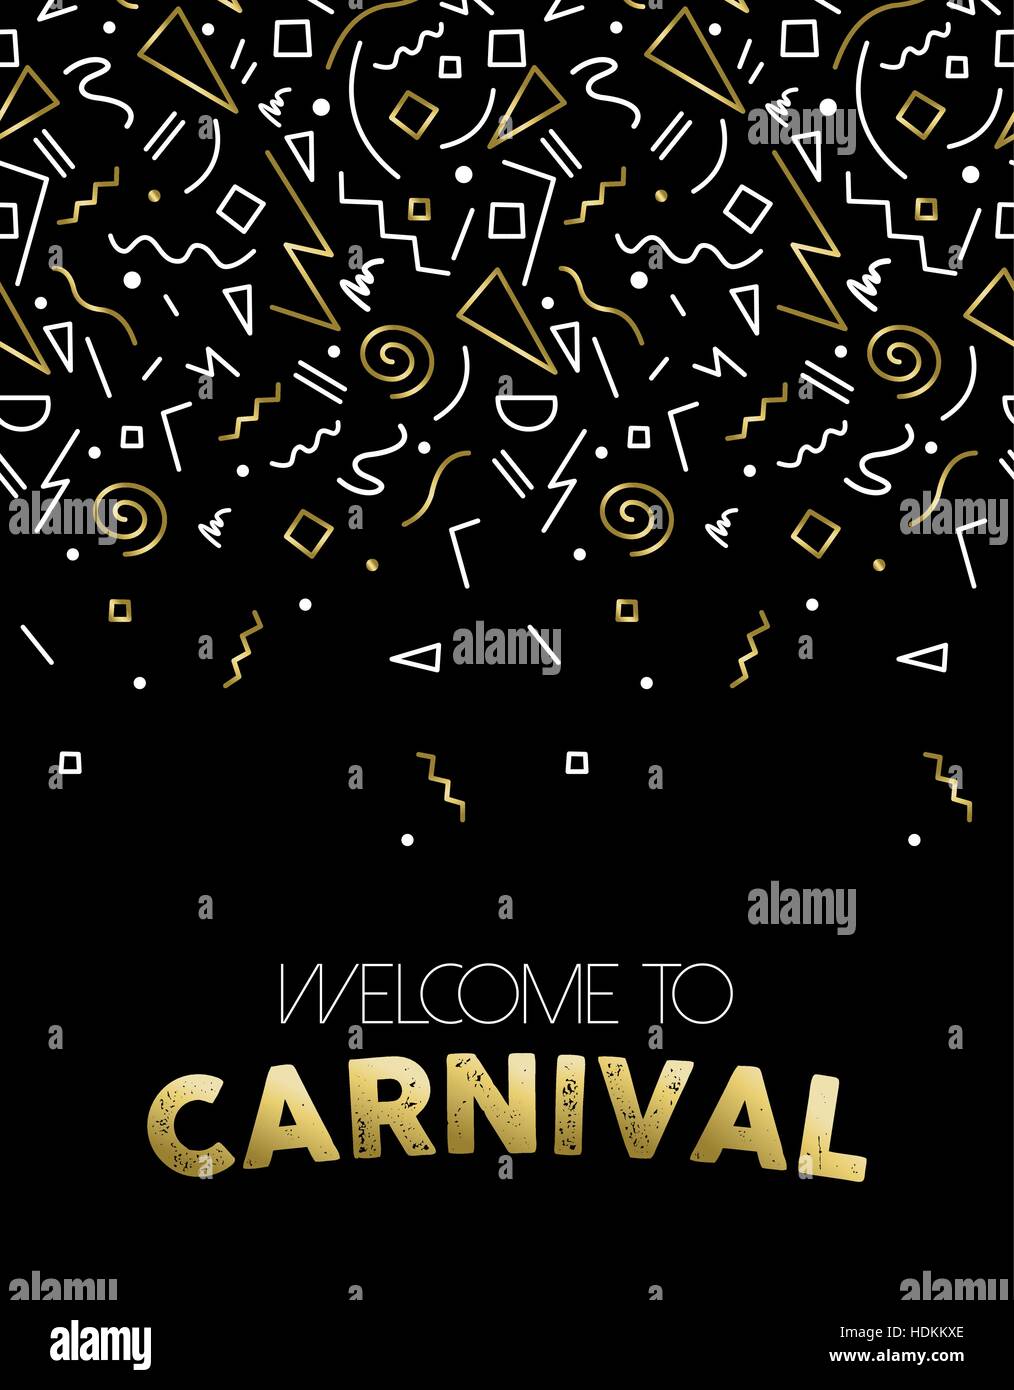 Welcome to carnival illustration, gold party confetti in abstract linear style for event poster, card or invitation. EPS10 vector. Stock Vector